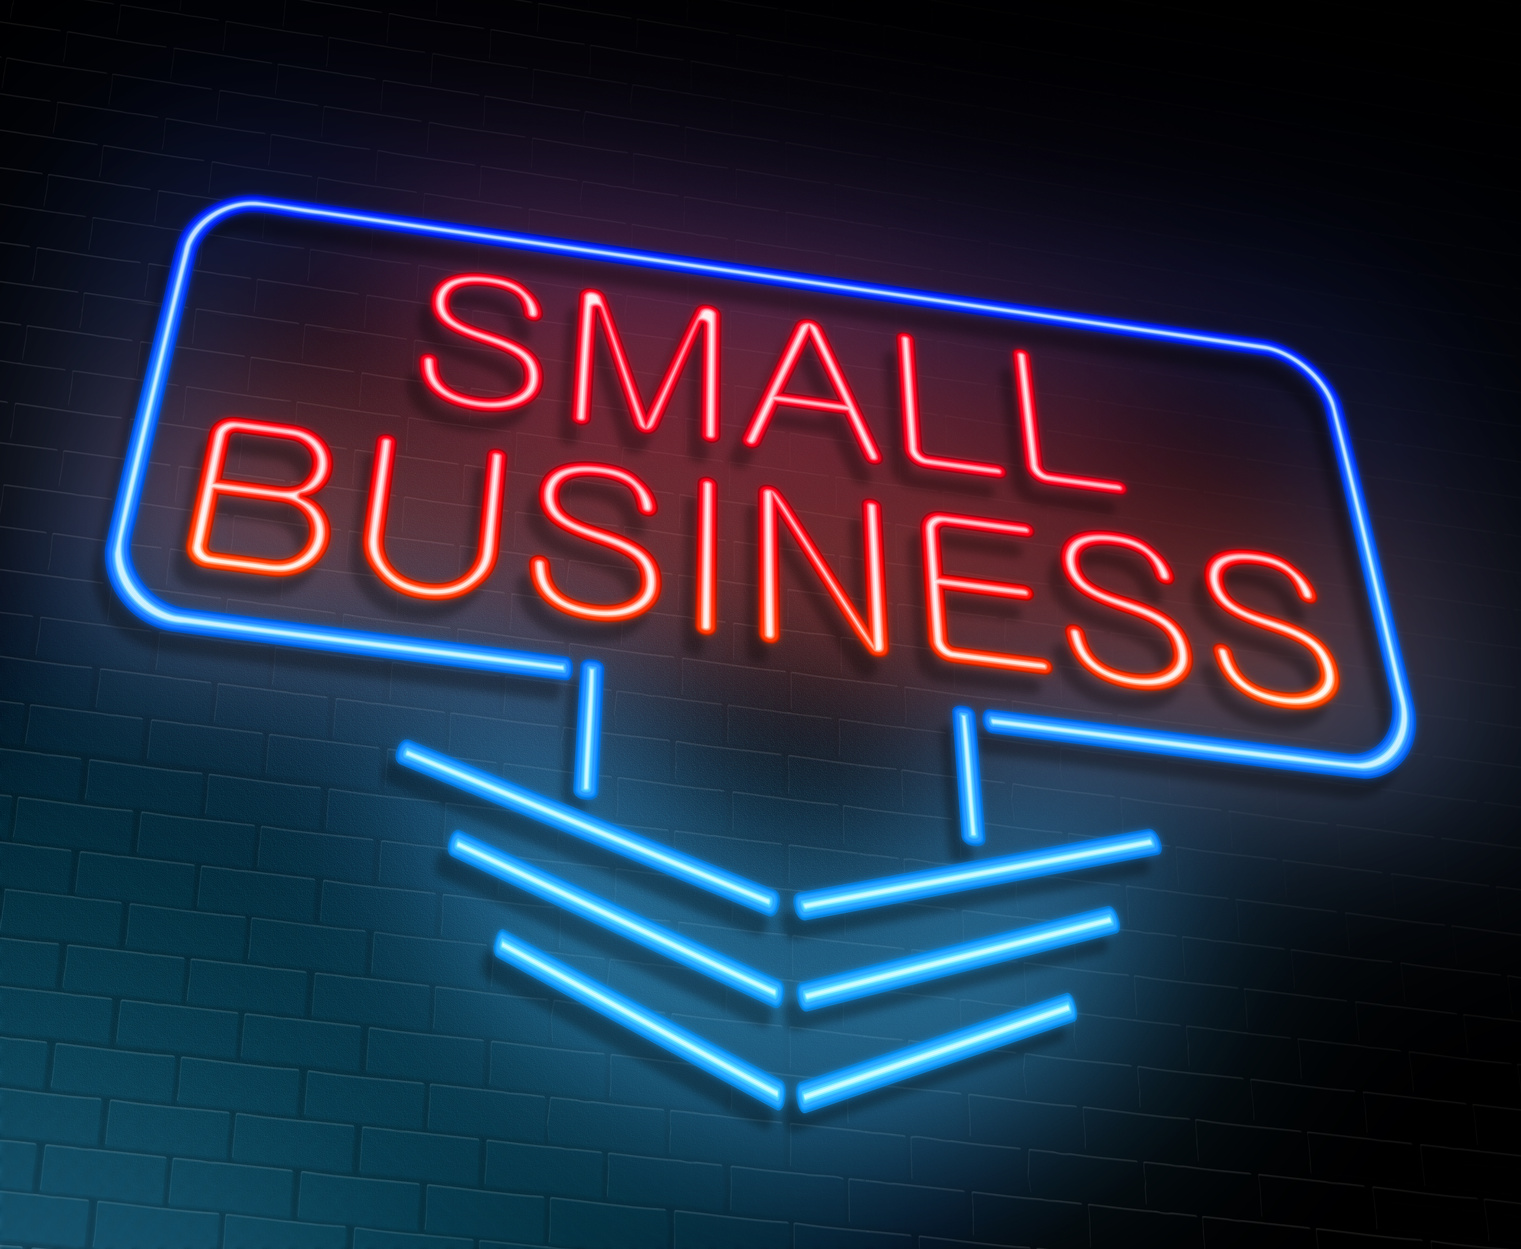 Is Your Small Business Properly Protected?